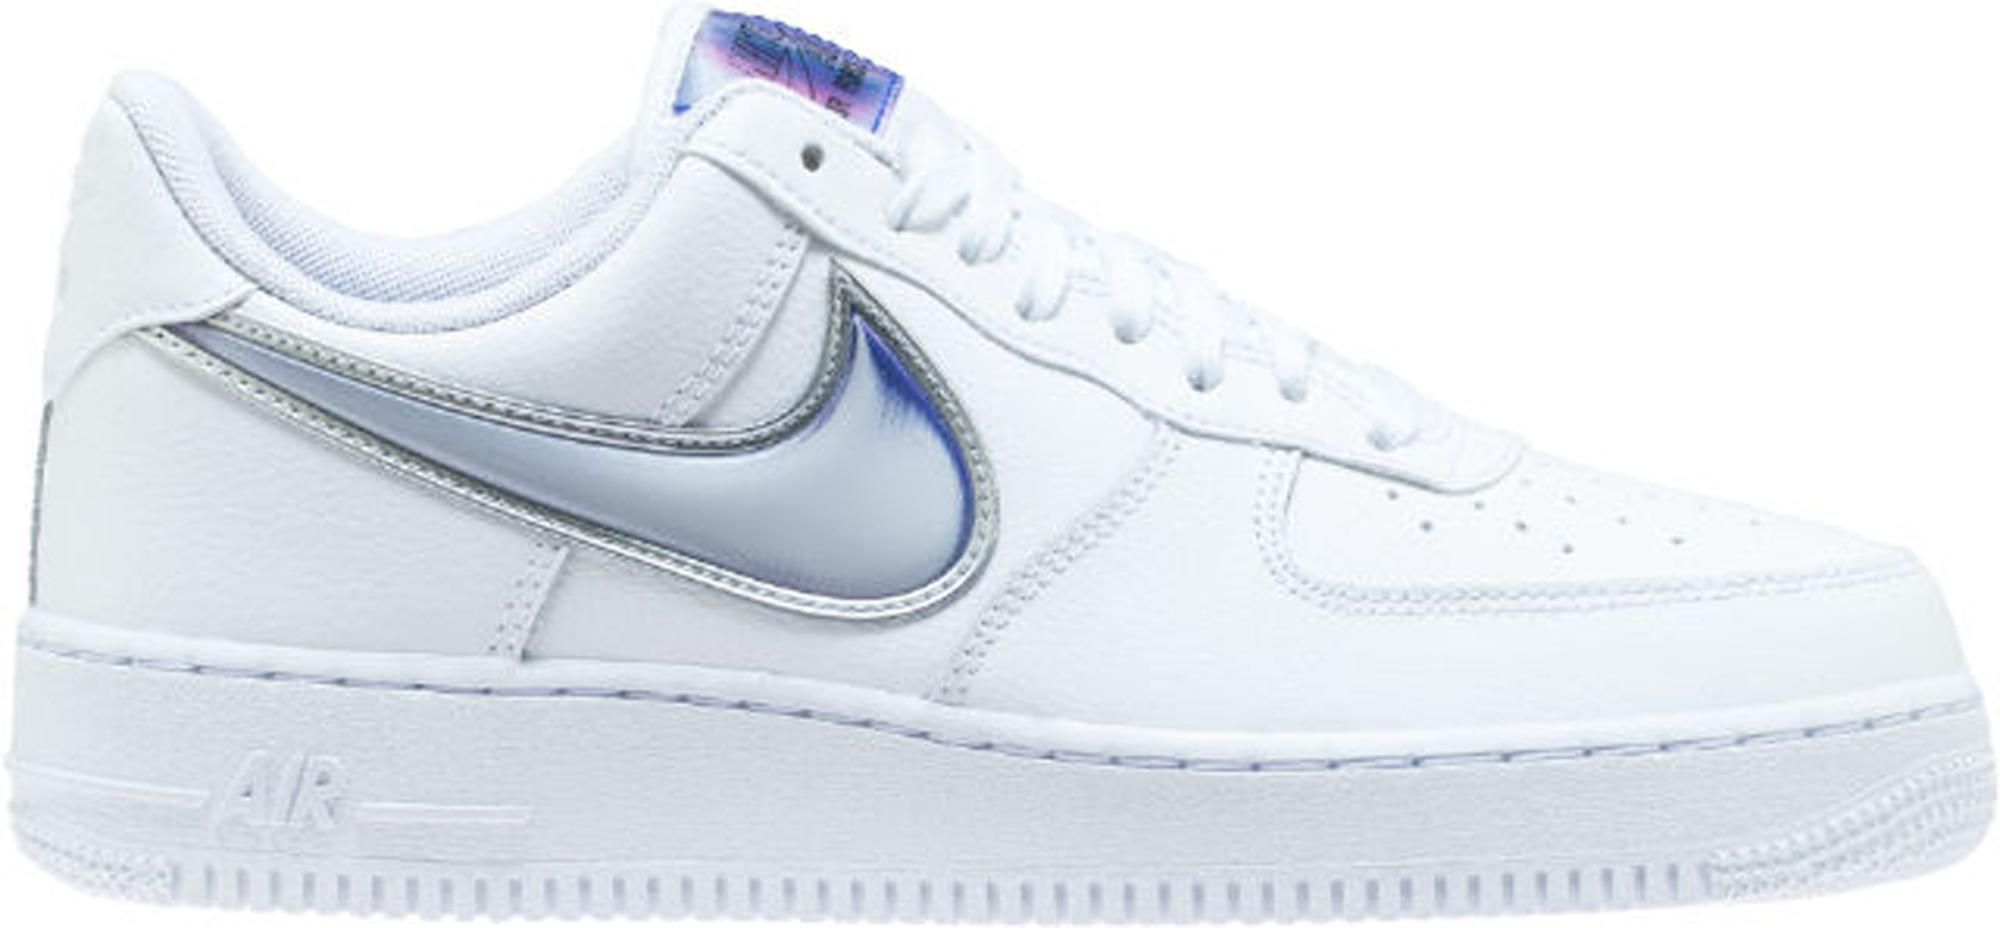 nike air force 1 low oversized swoosh white racer blue